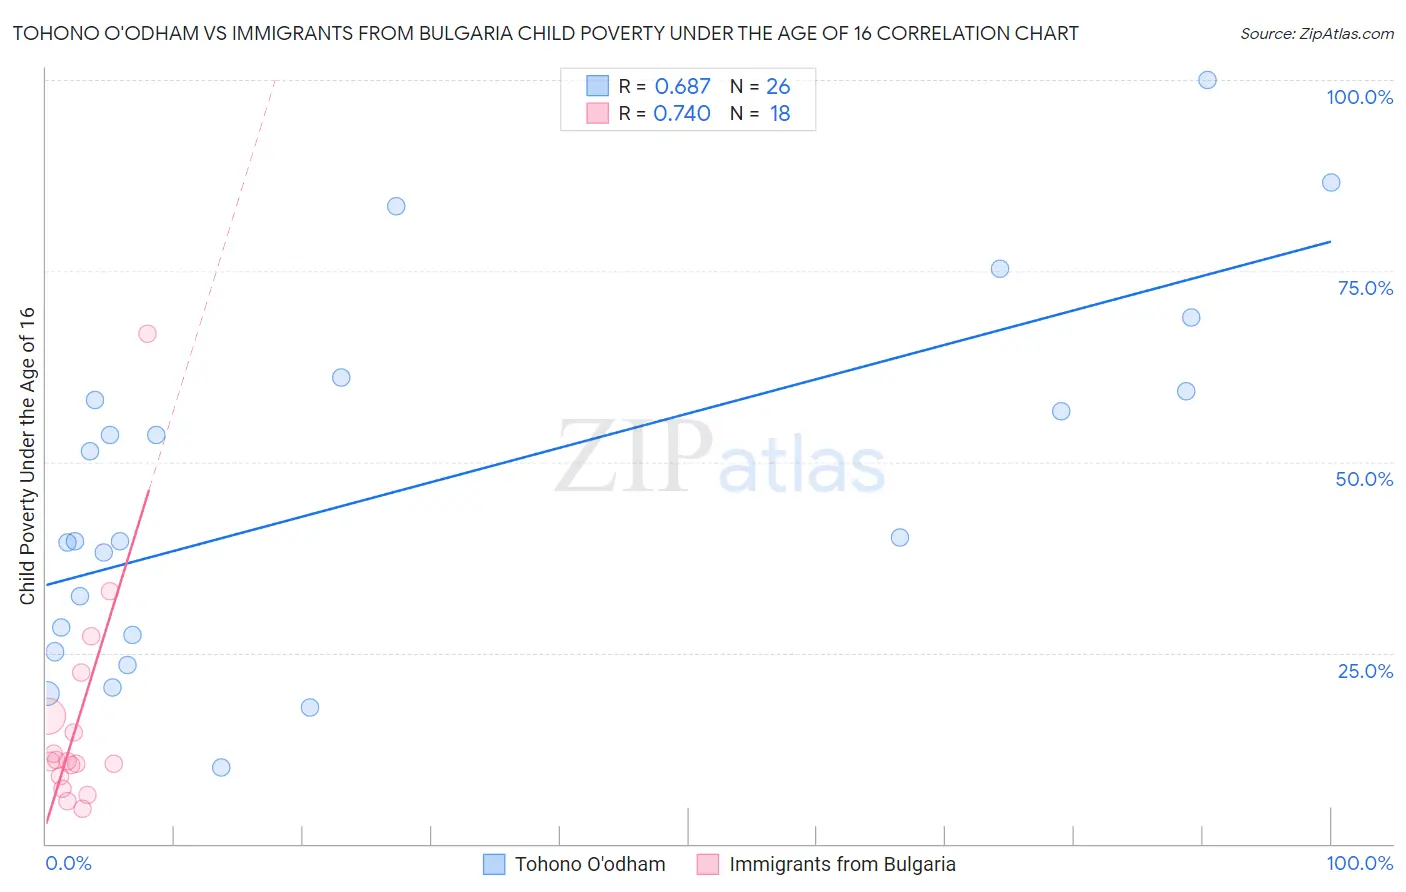 Tohono O'odham vs Immigrants from Bulgaria Child Poverty Under the Age of 16